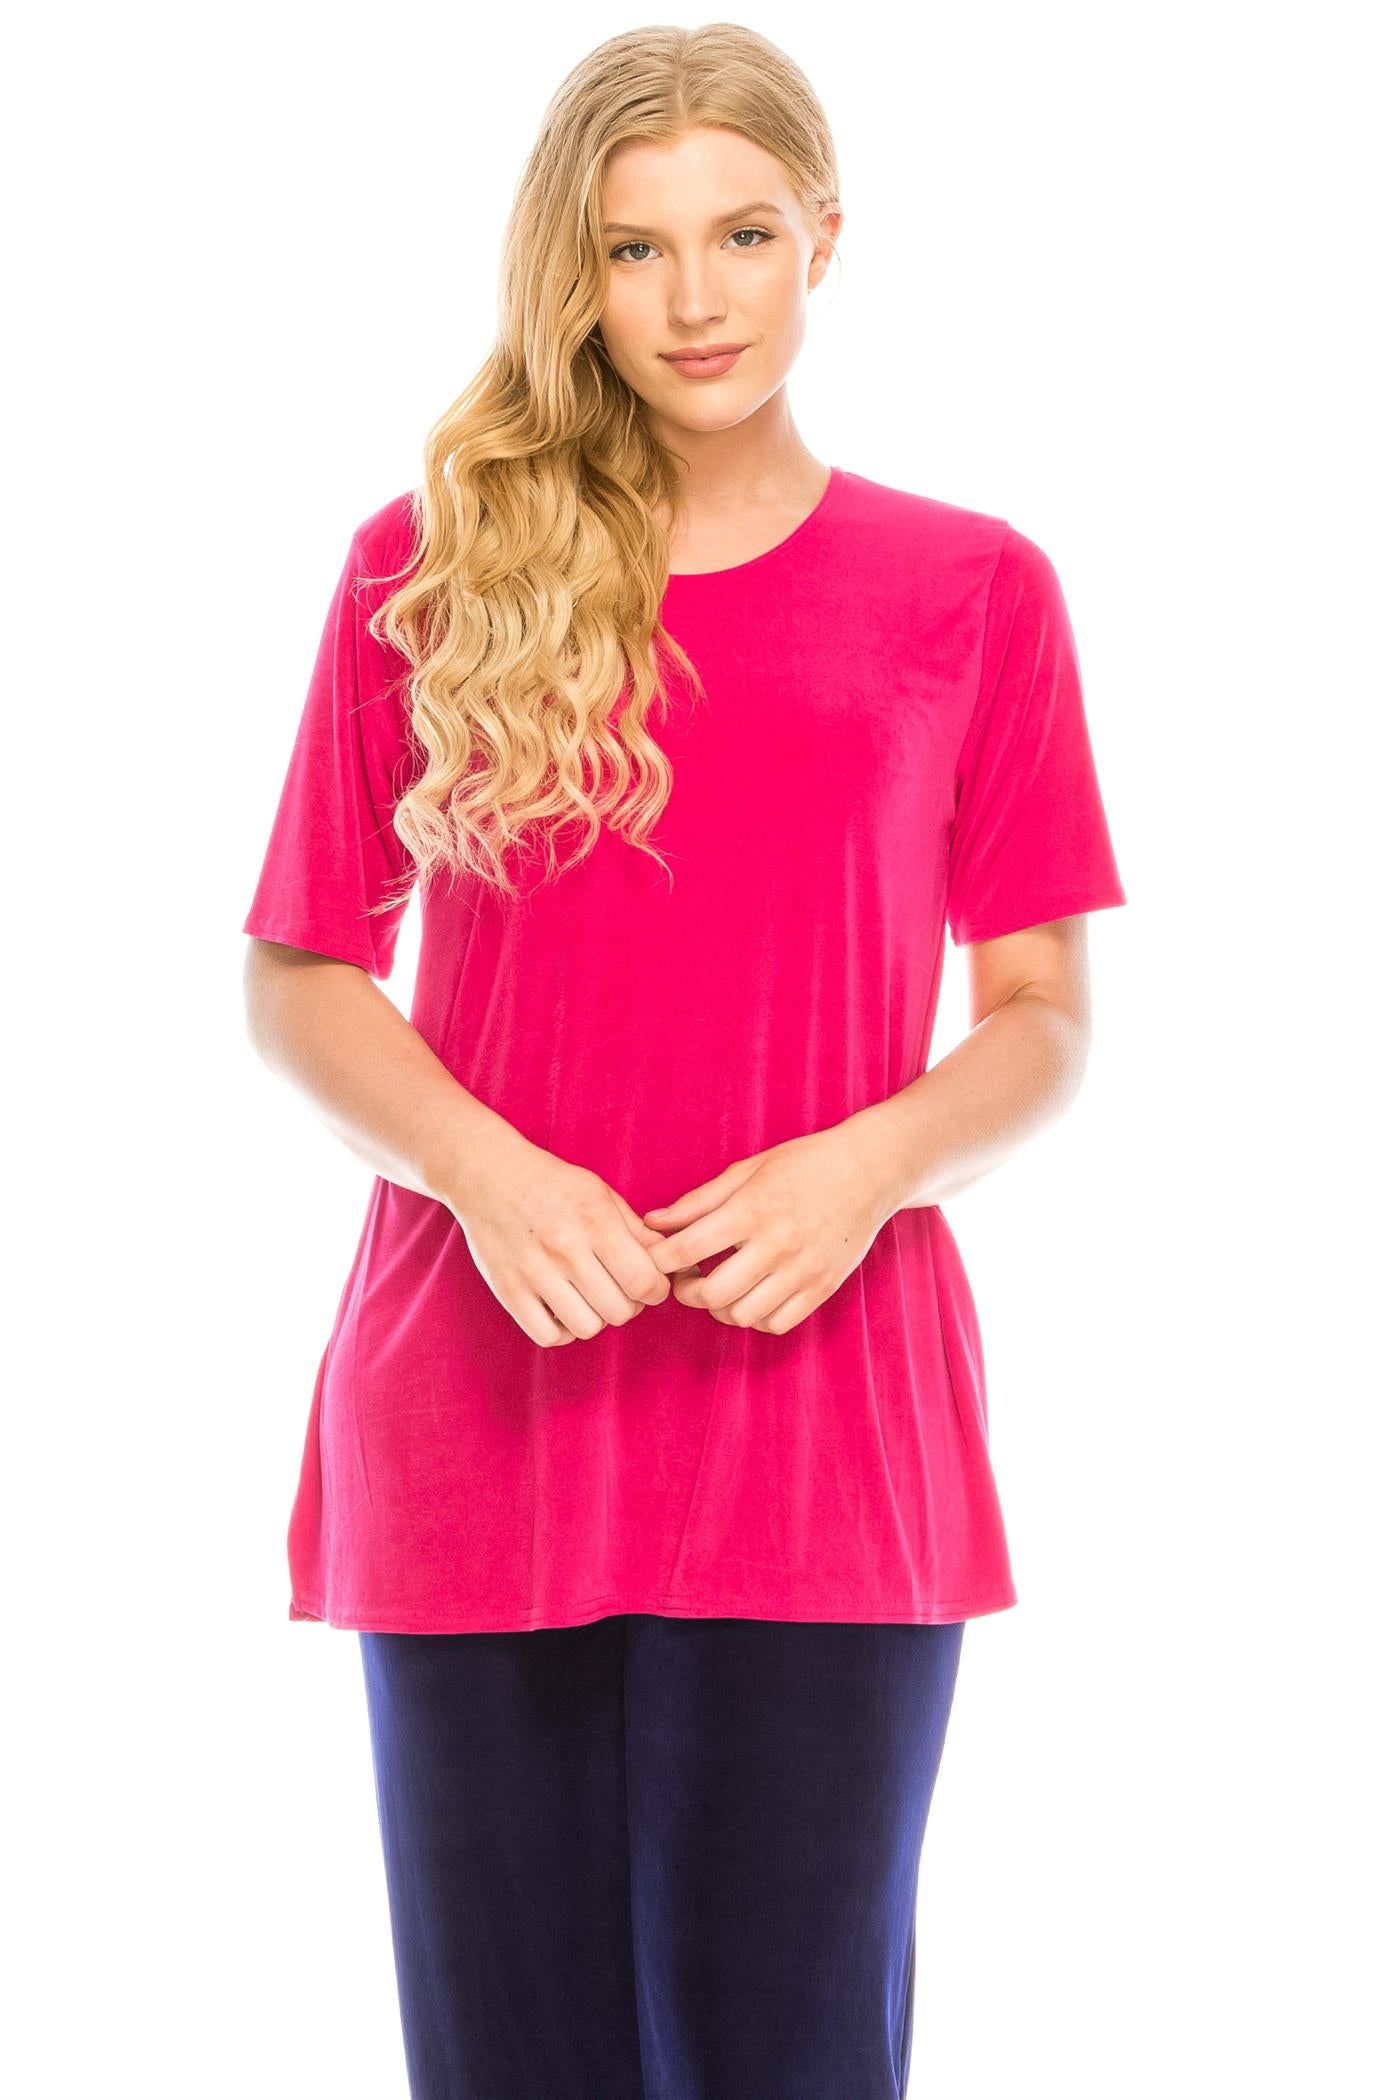 90% polyester / 10% spandex  Look as sharp as ever in this round neck short sleeve top - no wrinkles, no fuss! Its lightweight fabric is designed to keep you feeling comfortable and stylish all day long. Take on the world in confidence!  Hand or machine wash in cold water.  Made in U.S.A